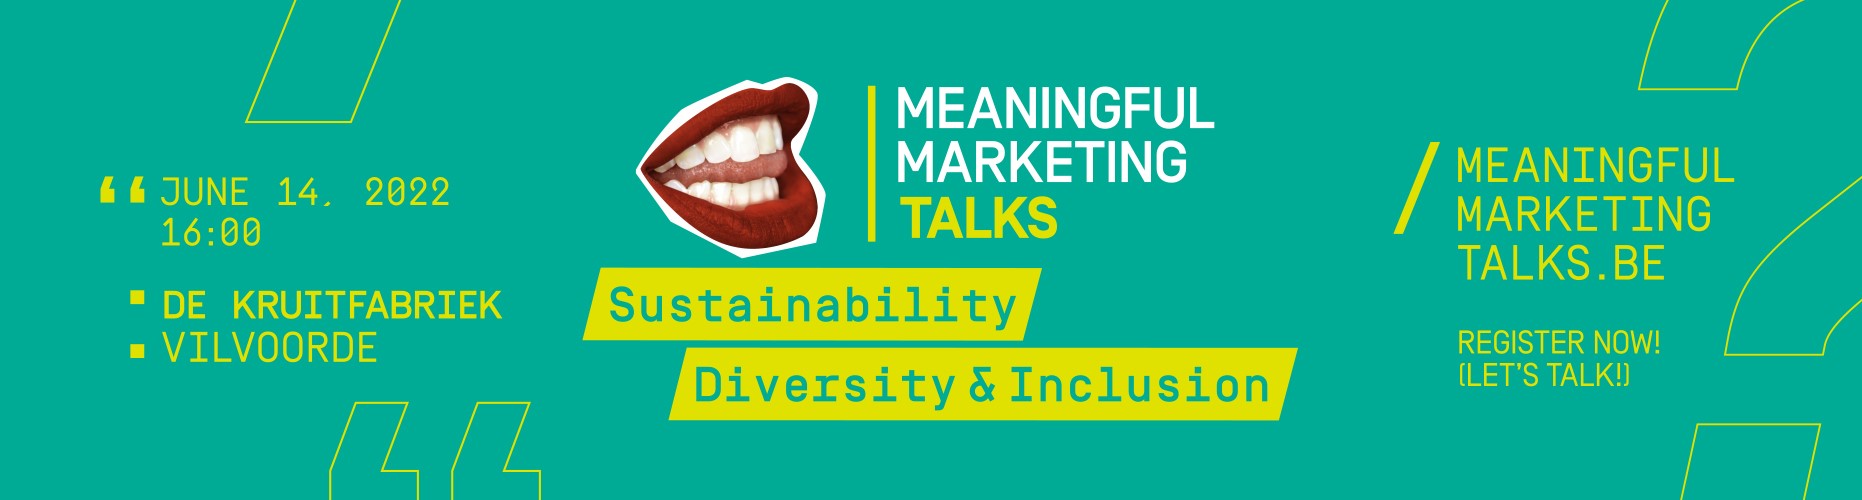 BAM MMT Sustainability - Diversity&amp;Inclusion Banner 1862x500 001